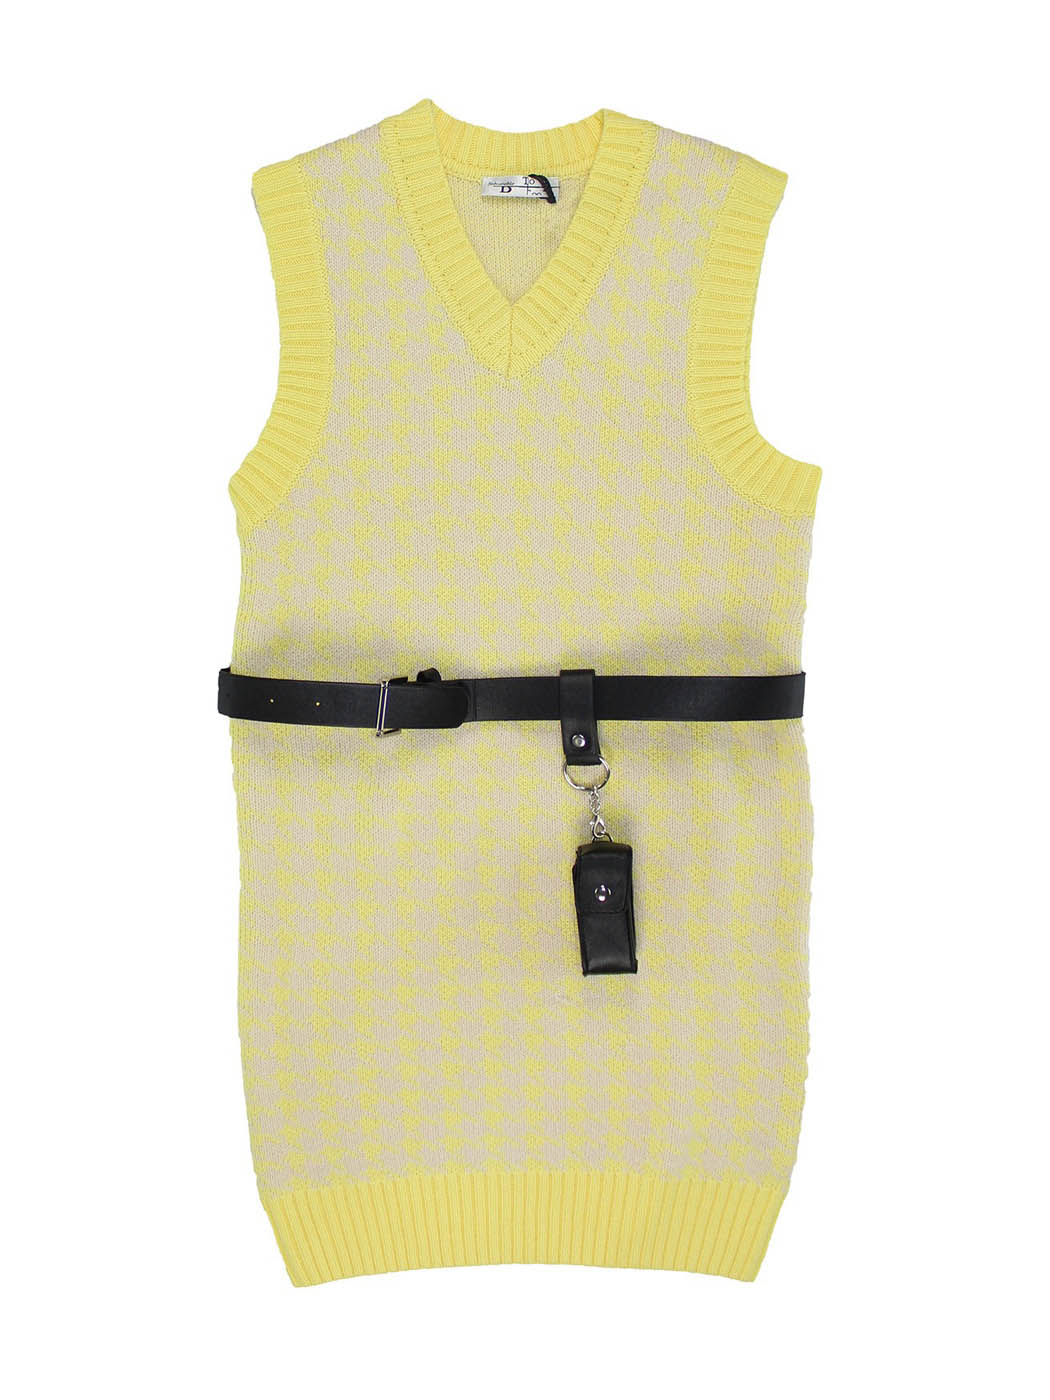 Girl's knitted vest dress - TBT1351 Yellow